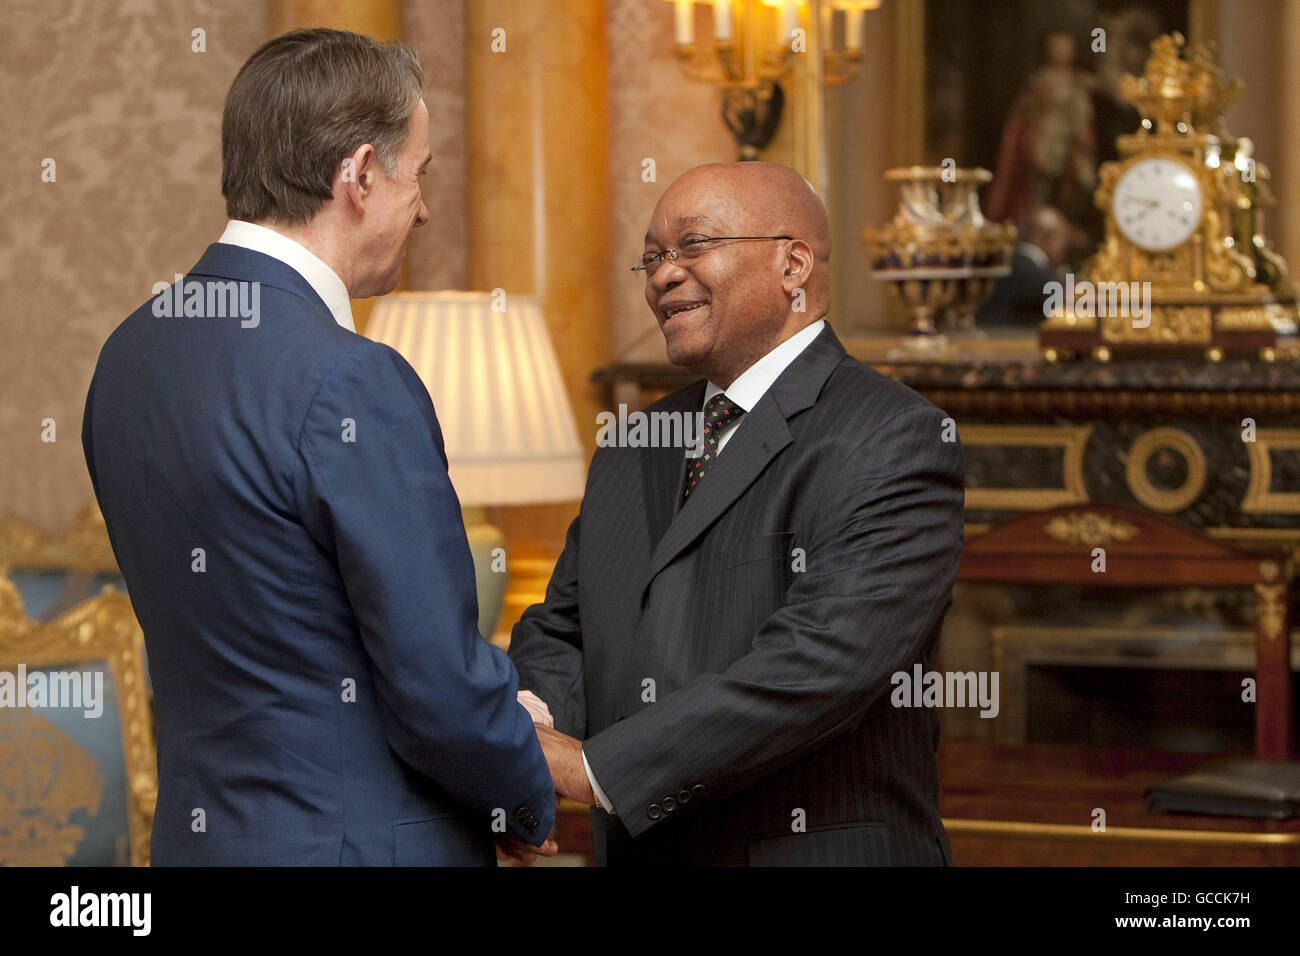 South African President Jacob Zuma meets Business Secretary Lord Mandelson before a business breakfast at Buckingham Palace, central London, on the last day of his State Visit to Britain. Stock Photo